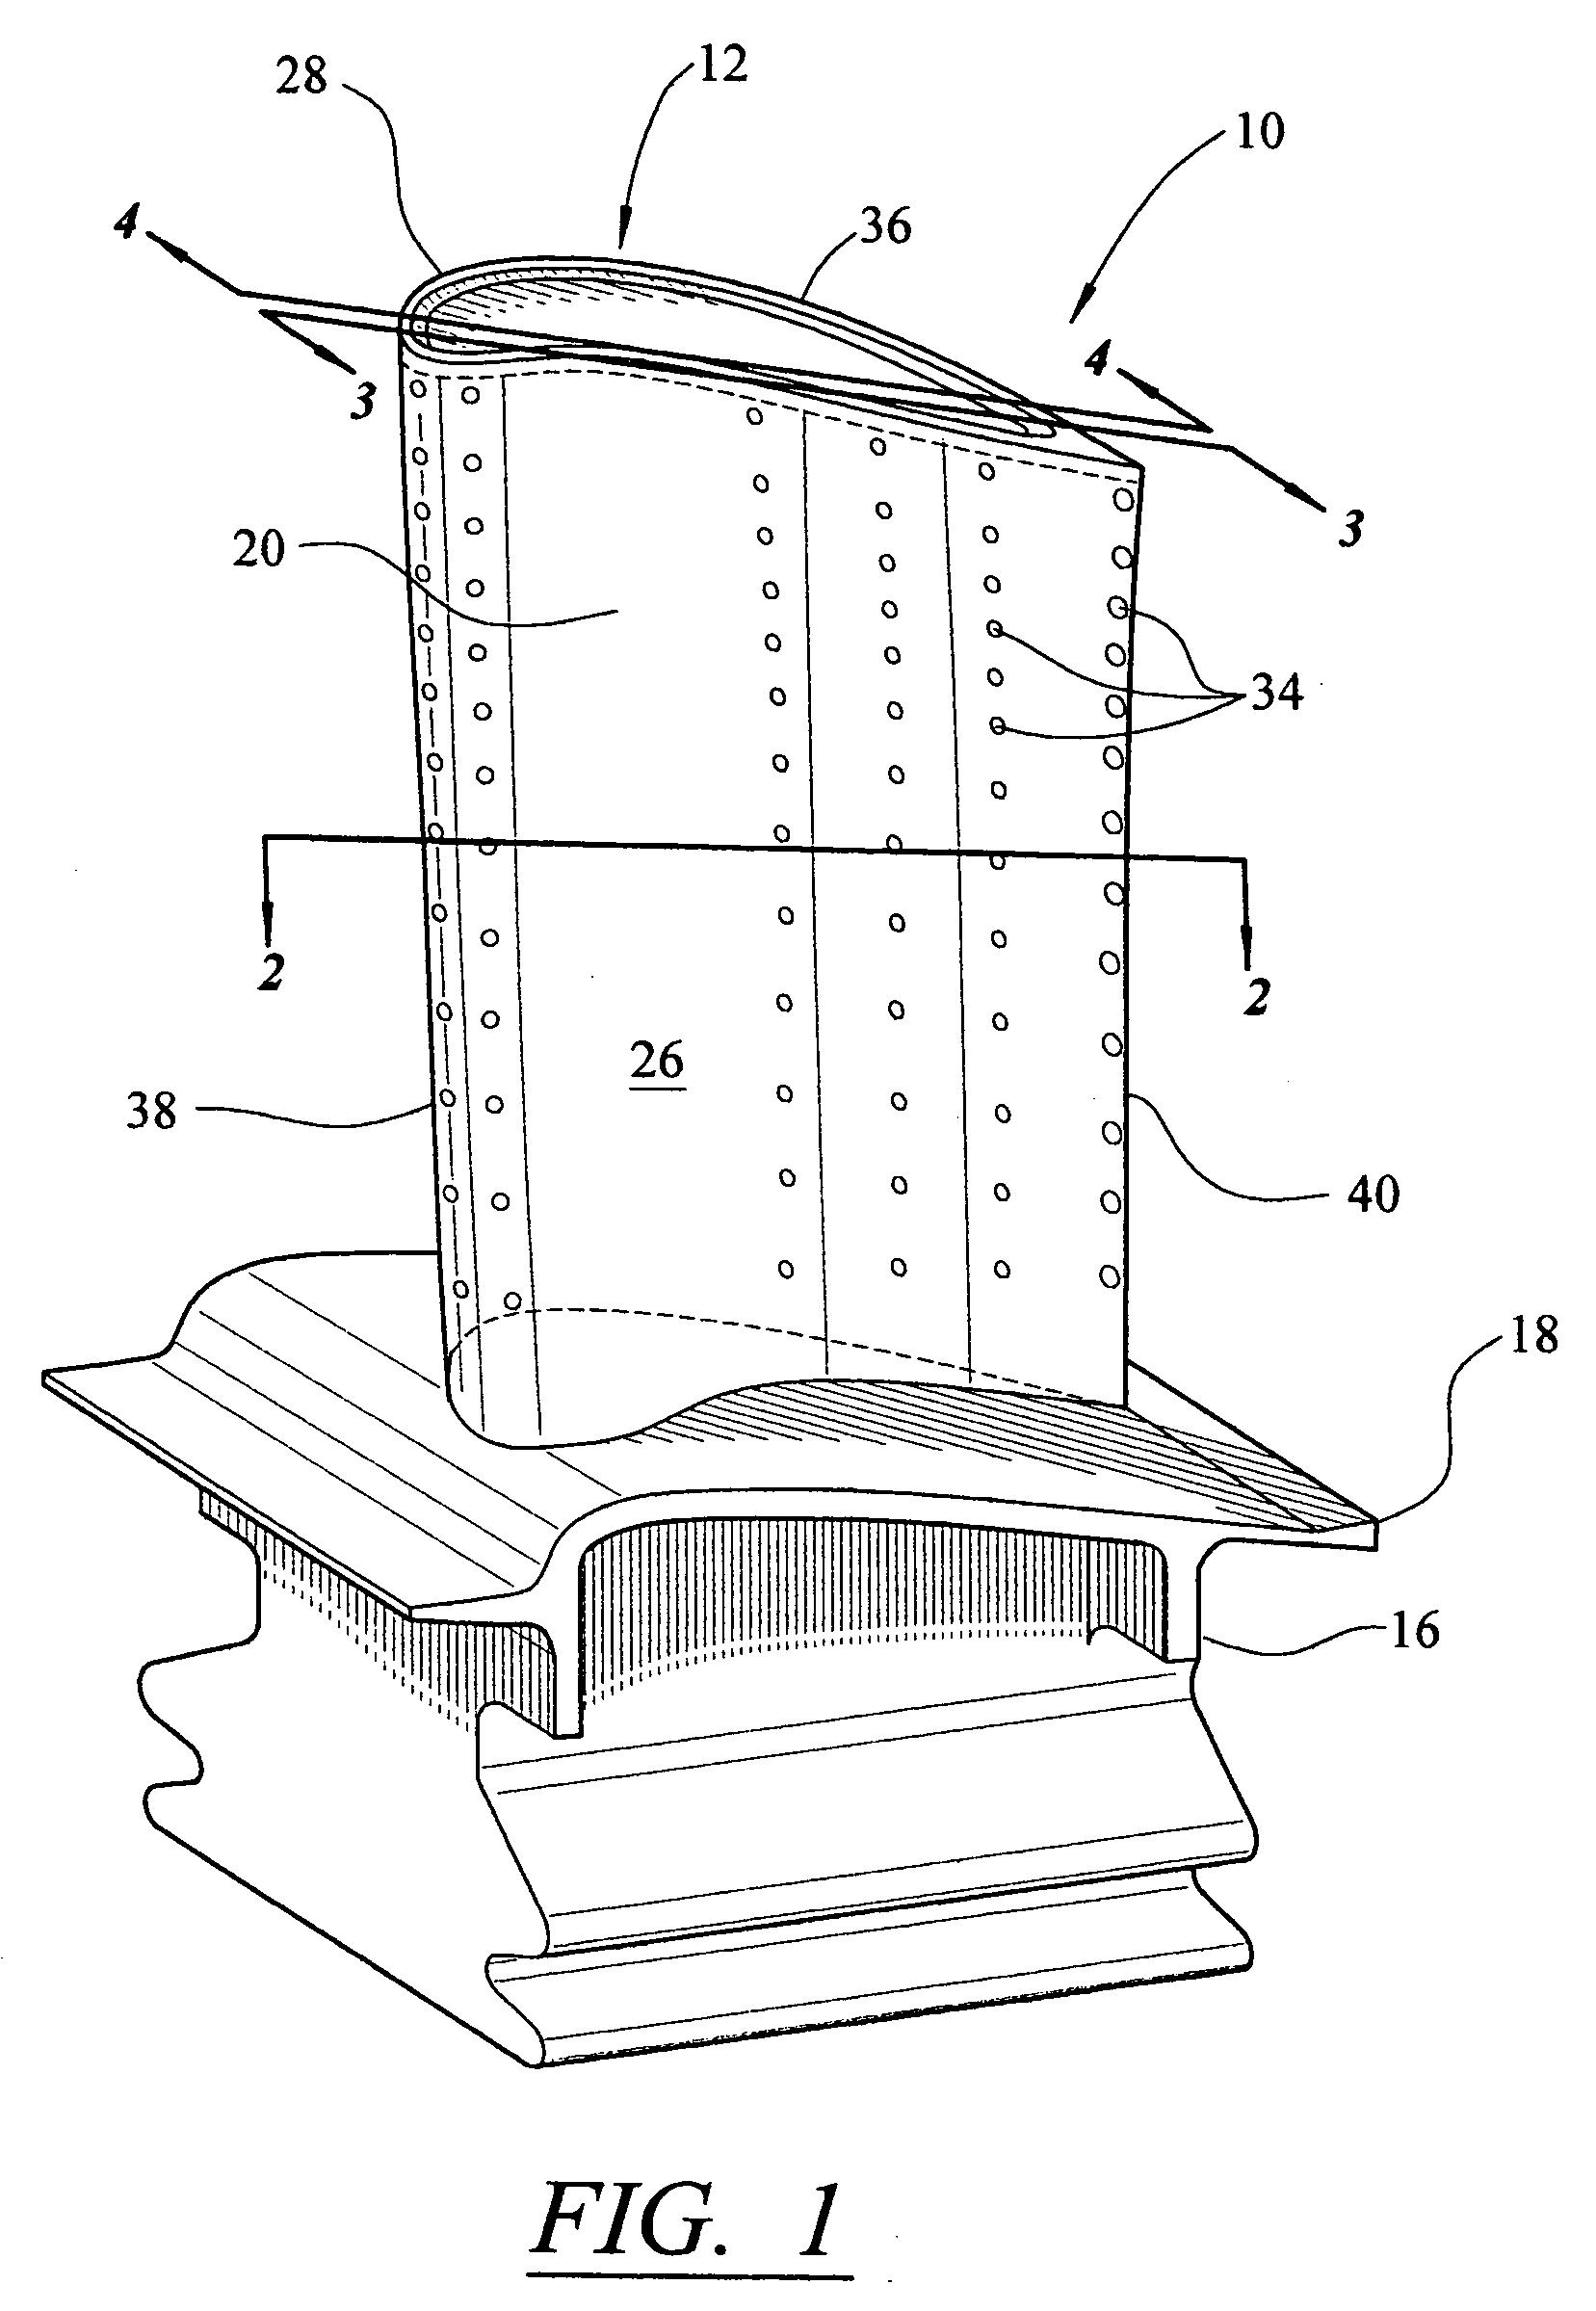 Impingement cooling system for a turbine blade